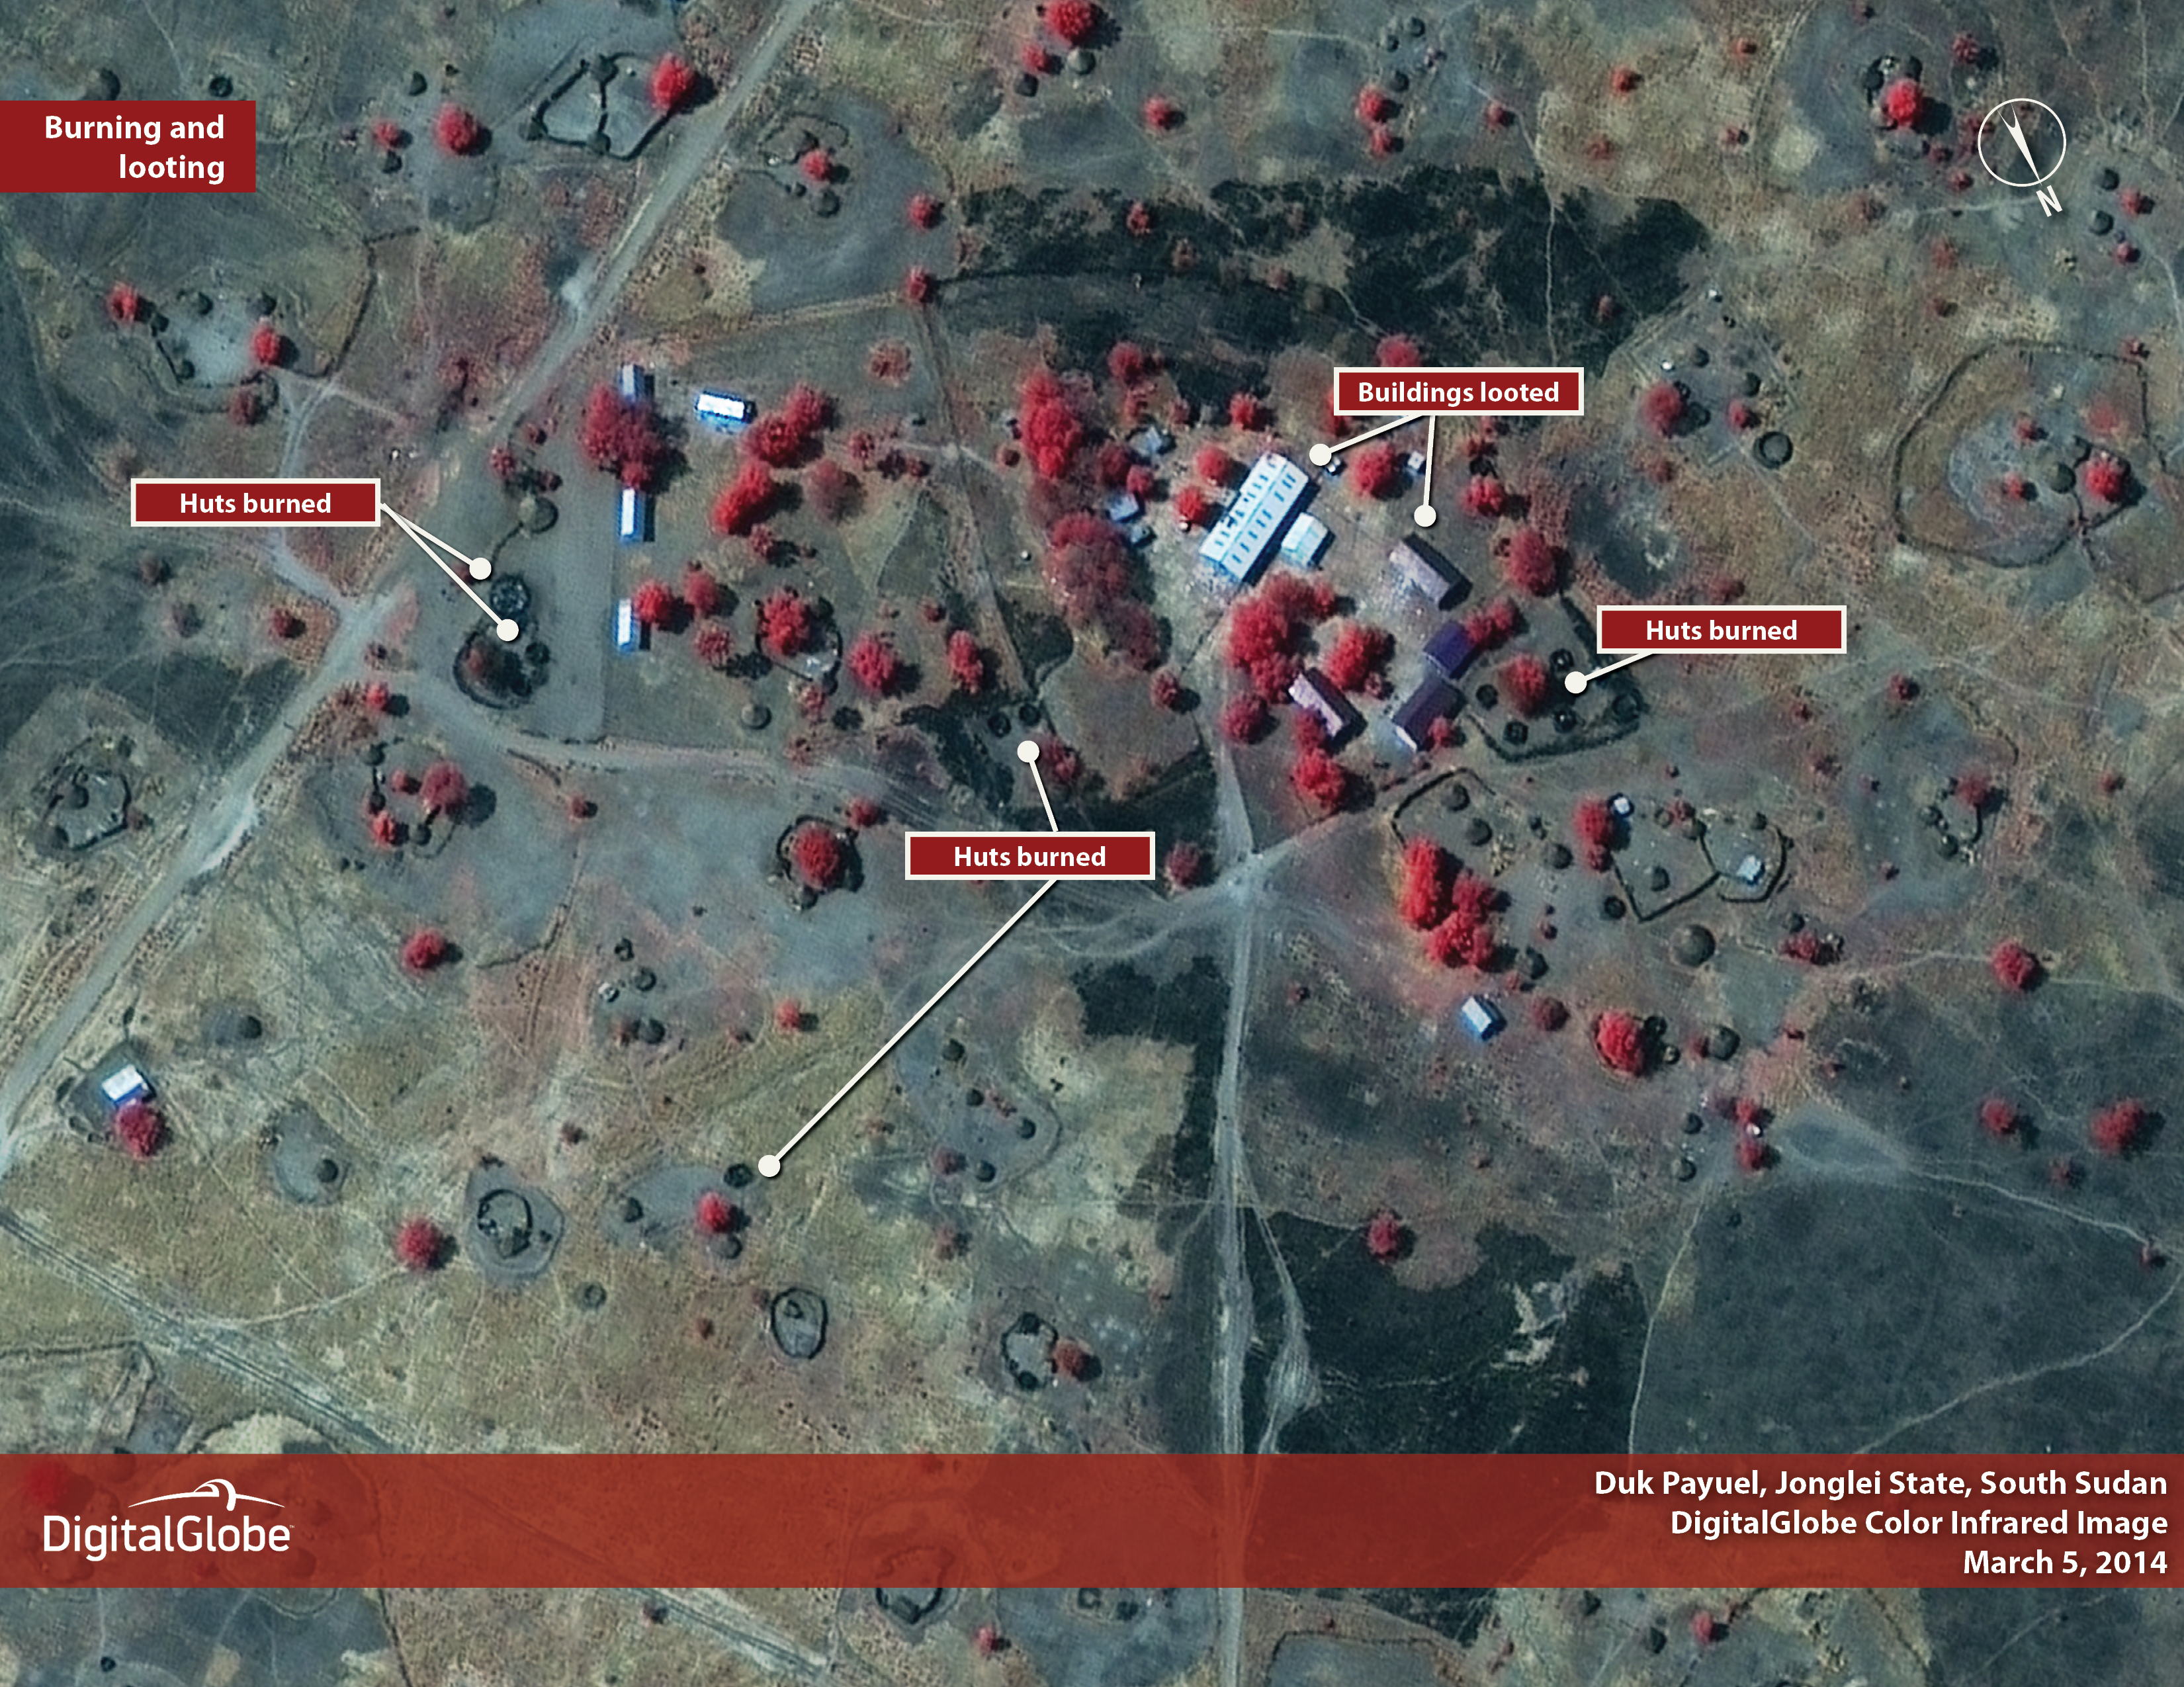 IMAGE 3: Though the total number of damaged or destroyed homes in Duk is unknown, at least 10 huts were burned in the area reviewed by DigitalGlobe analysts, who also identified buildings that had been looted between February 9, 2014 and March 5, 2014.